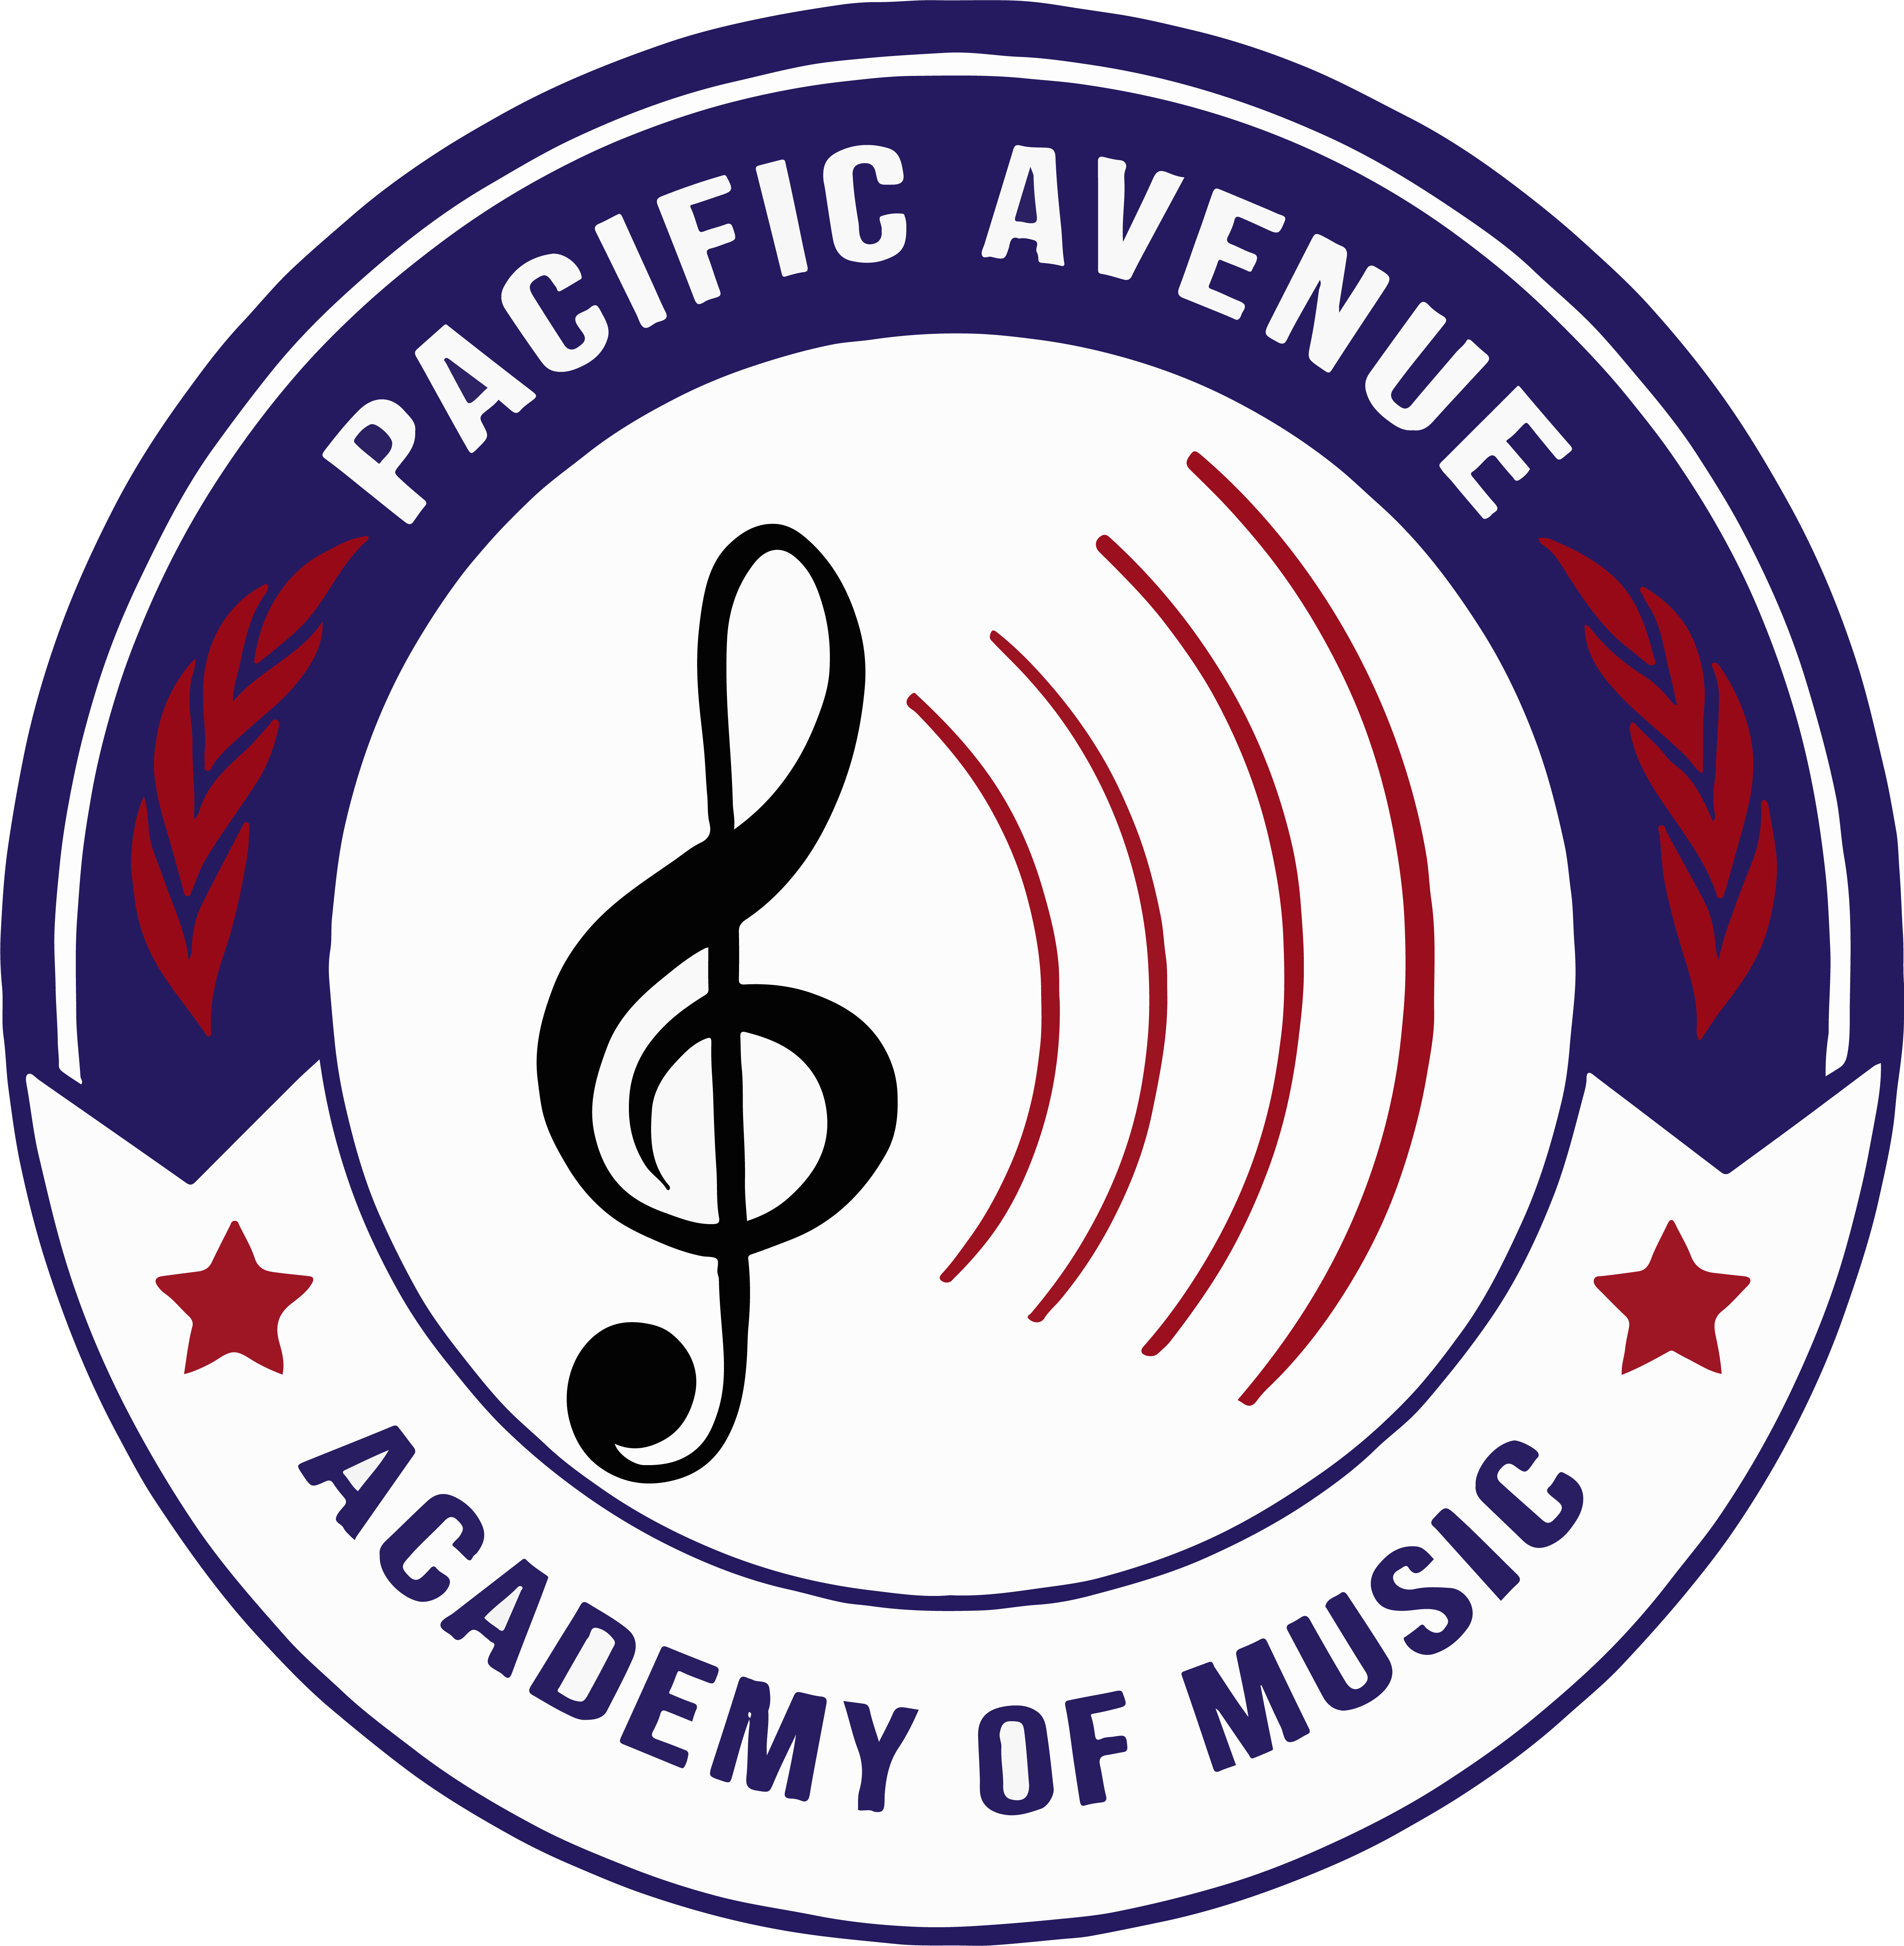 Pacific Avenue Academy of Music.png